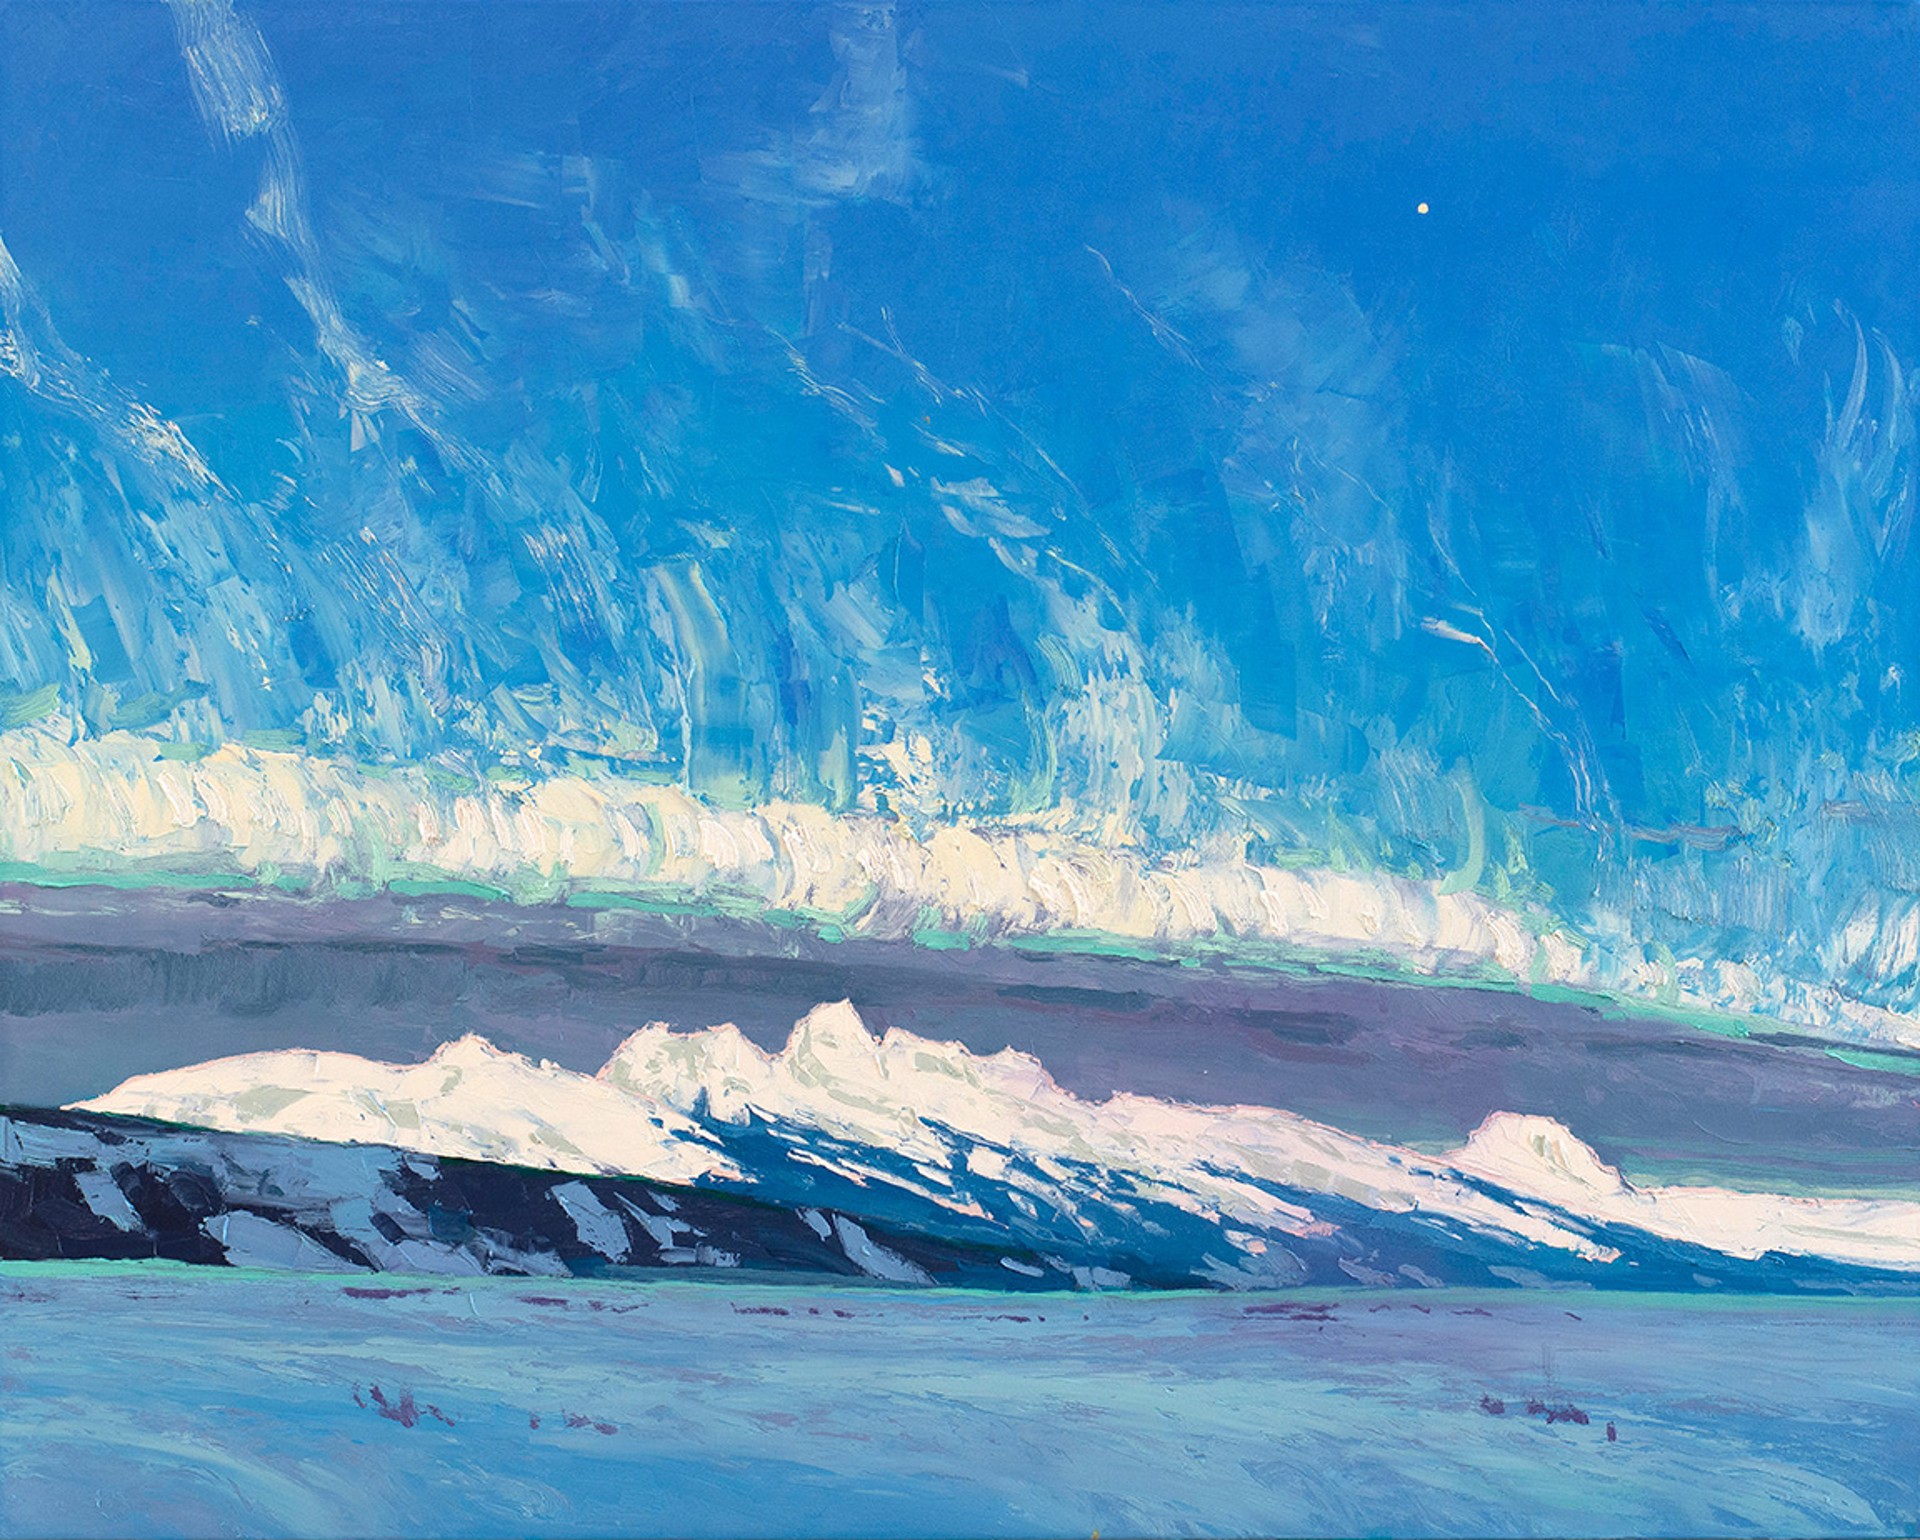 Original Oil Painting By Silas Thompson Of The Tetons In A Winter Landscape